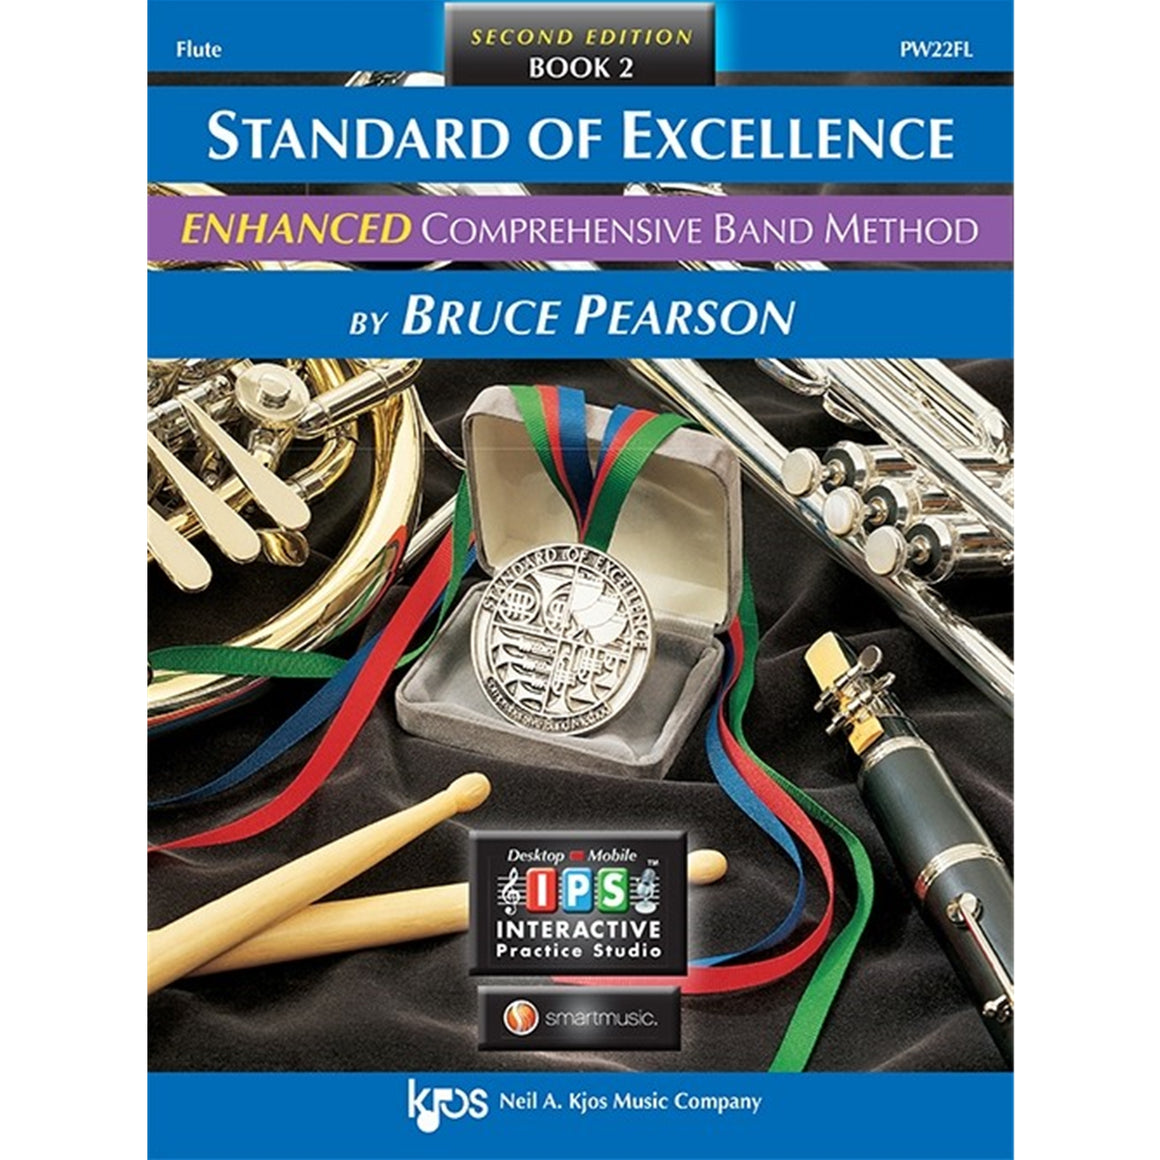 KJOS PW22FL Standard of Excellence Book 2 Flute